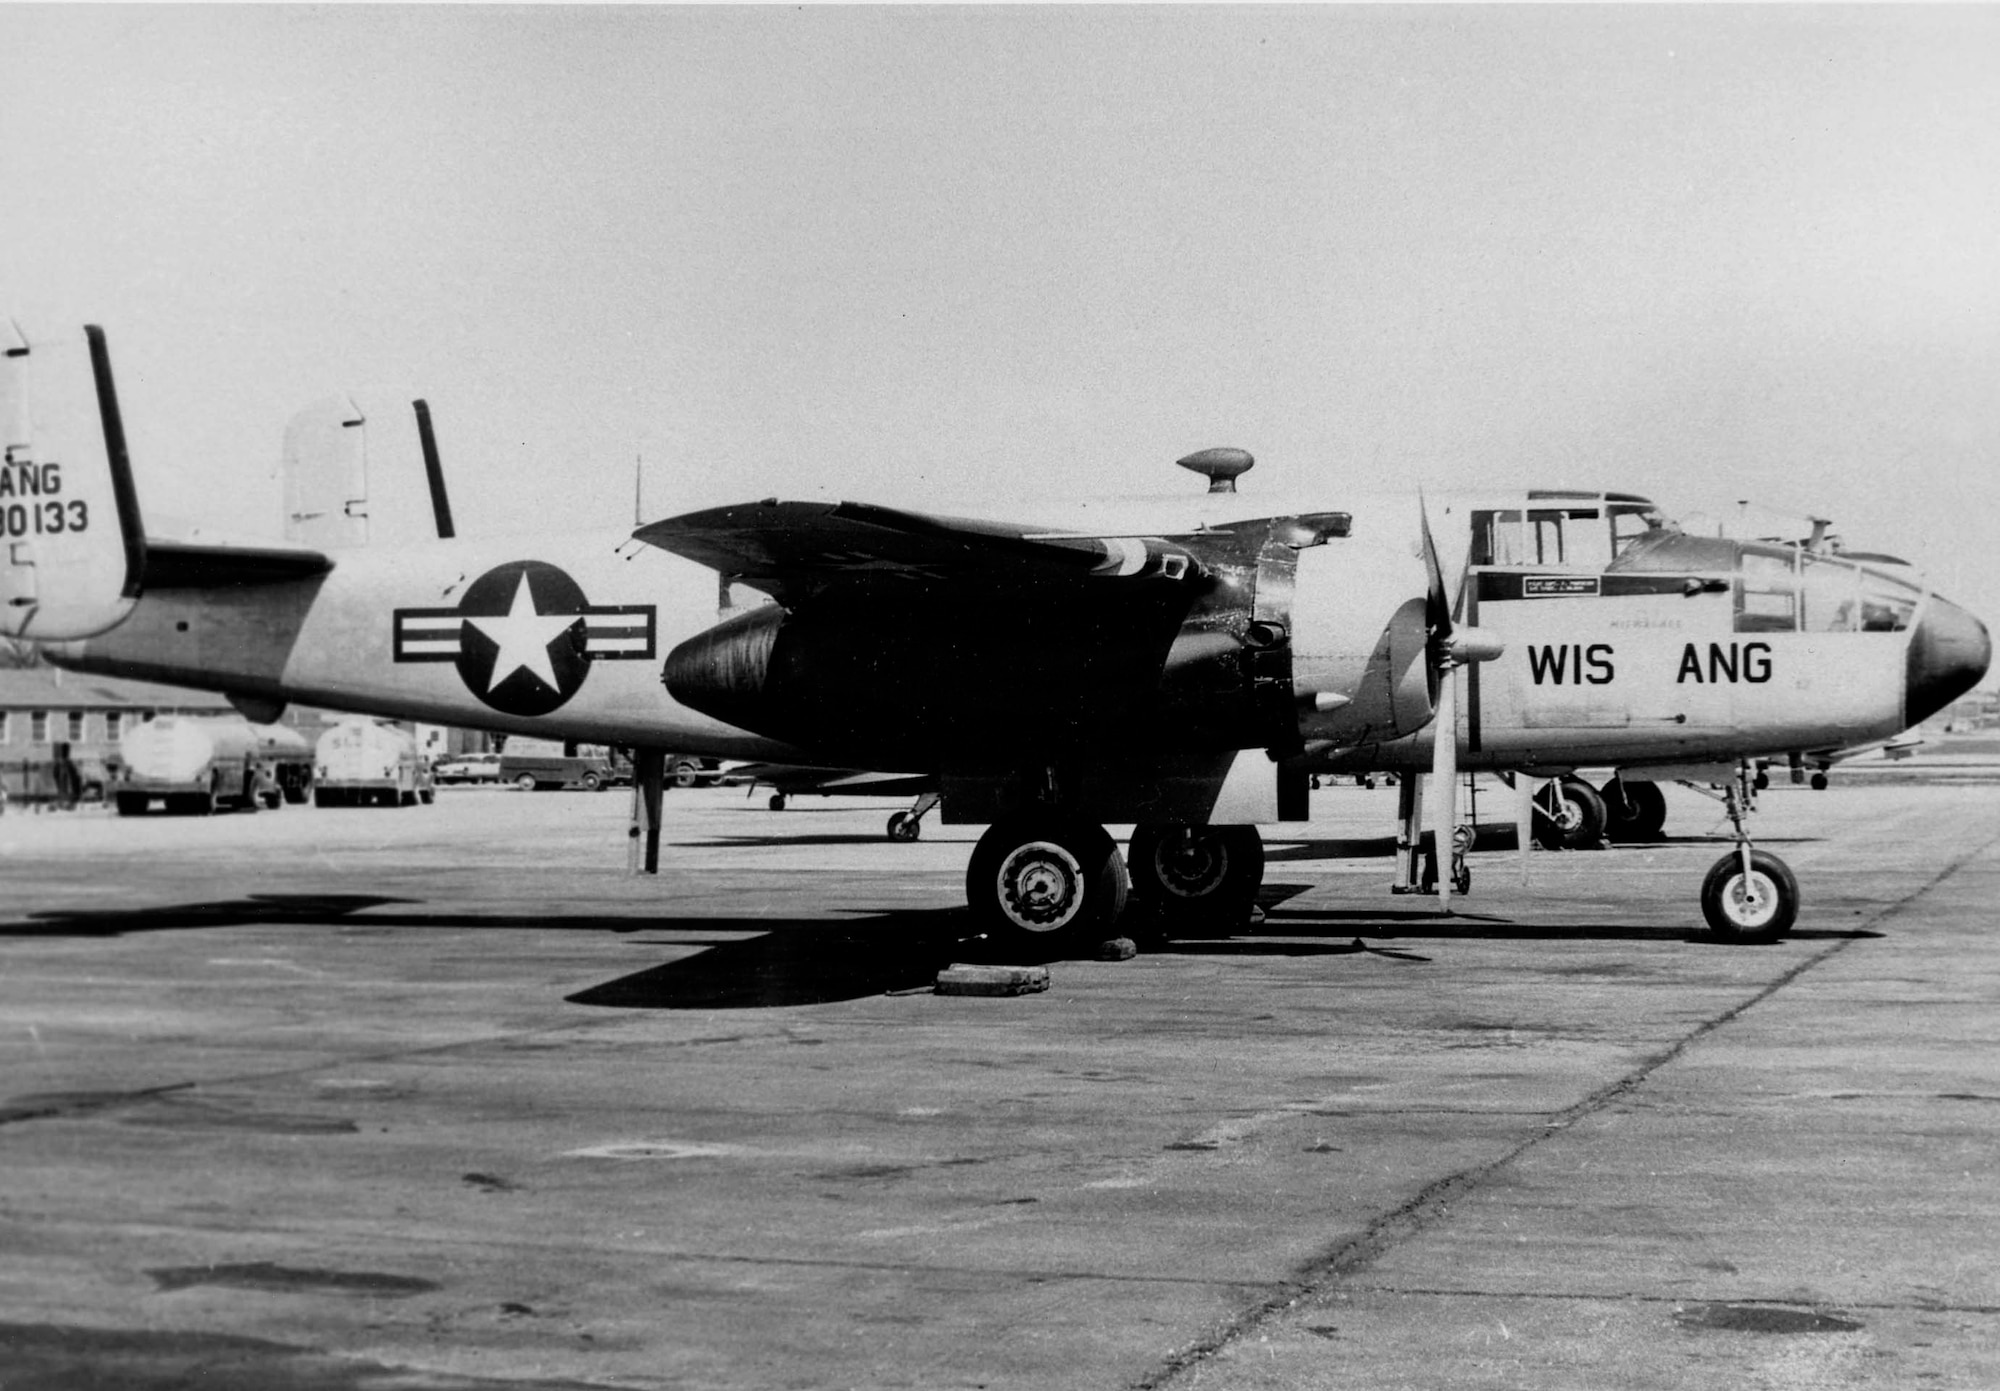 B-25 Mitchell medium bomber. This was operated by the 126th from 1955-1959.